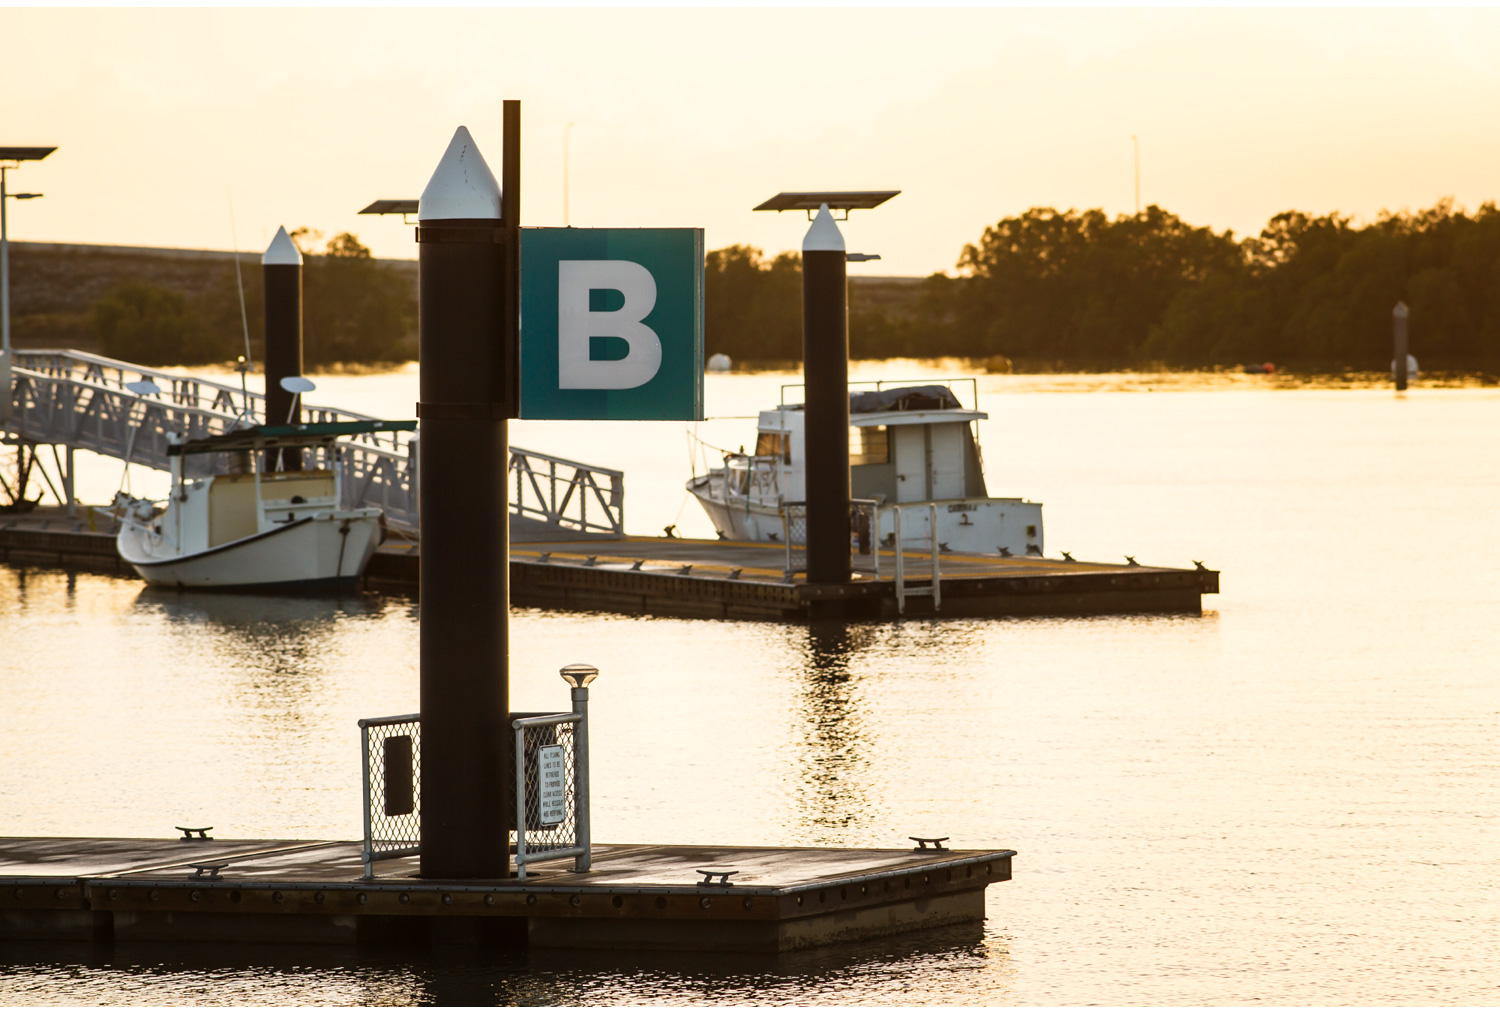 boating, park, recreation, jetty